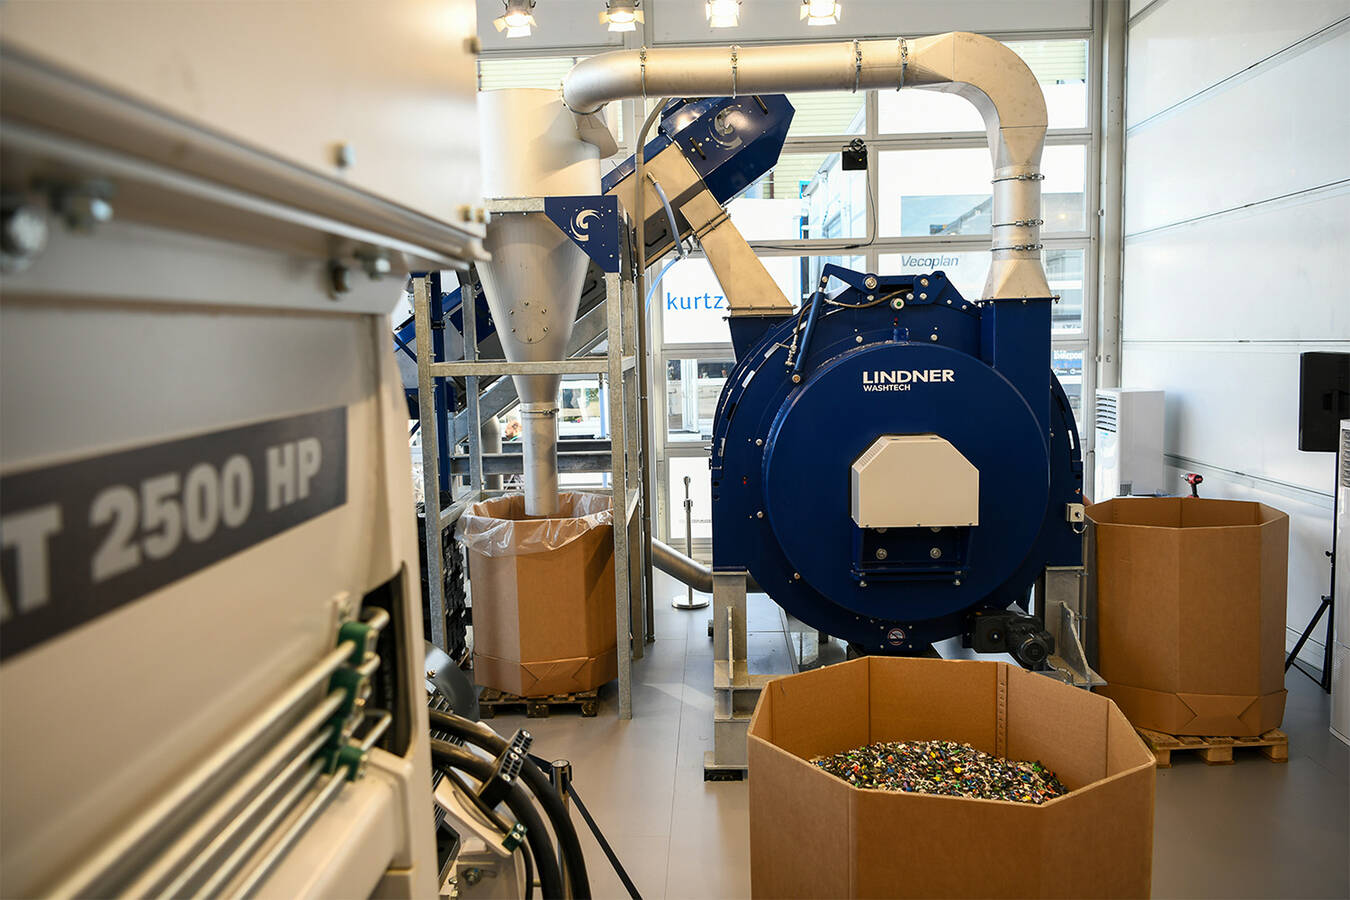 Daily Live-Shredding At the VDMA outdoor area, post consumer hard plastics were recycled live three times a day with the new Micromat HP shredder series, the friction washer Twister and the mechanical dryer Loop Dryer.